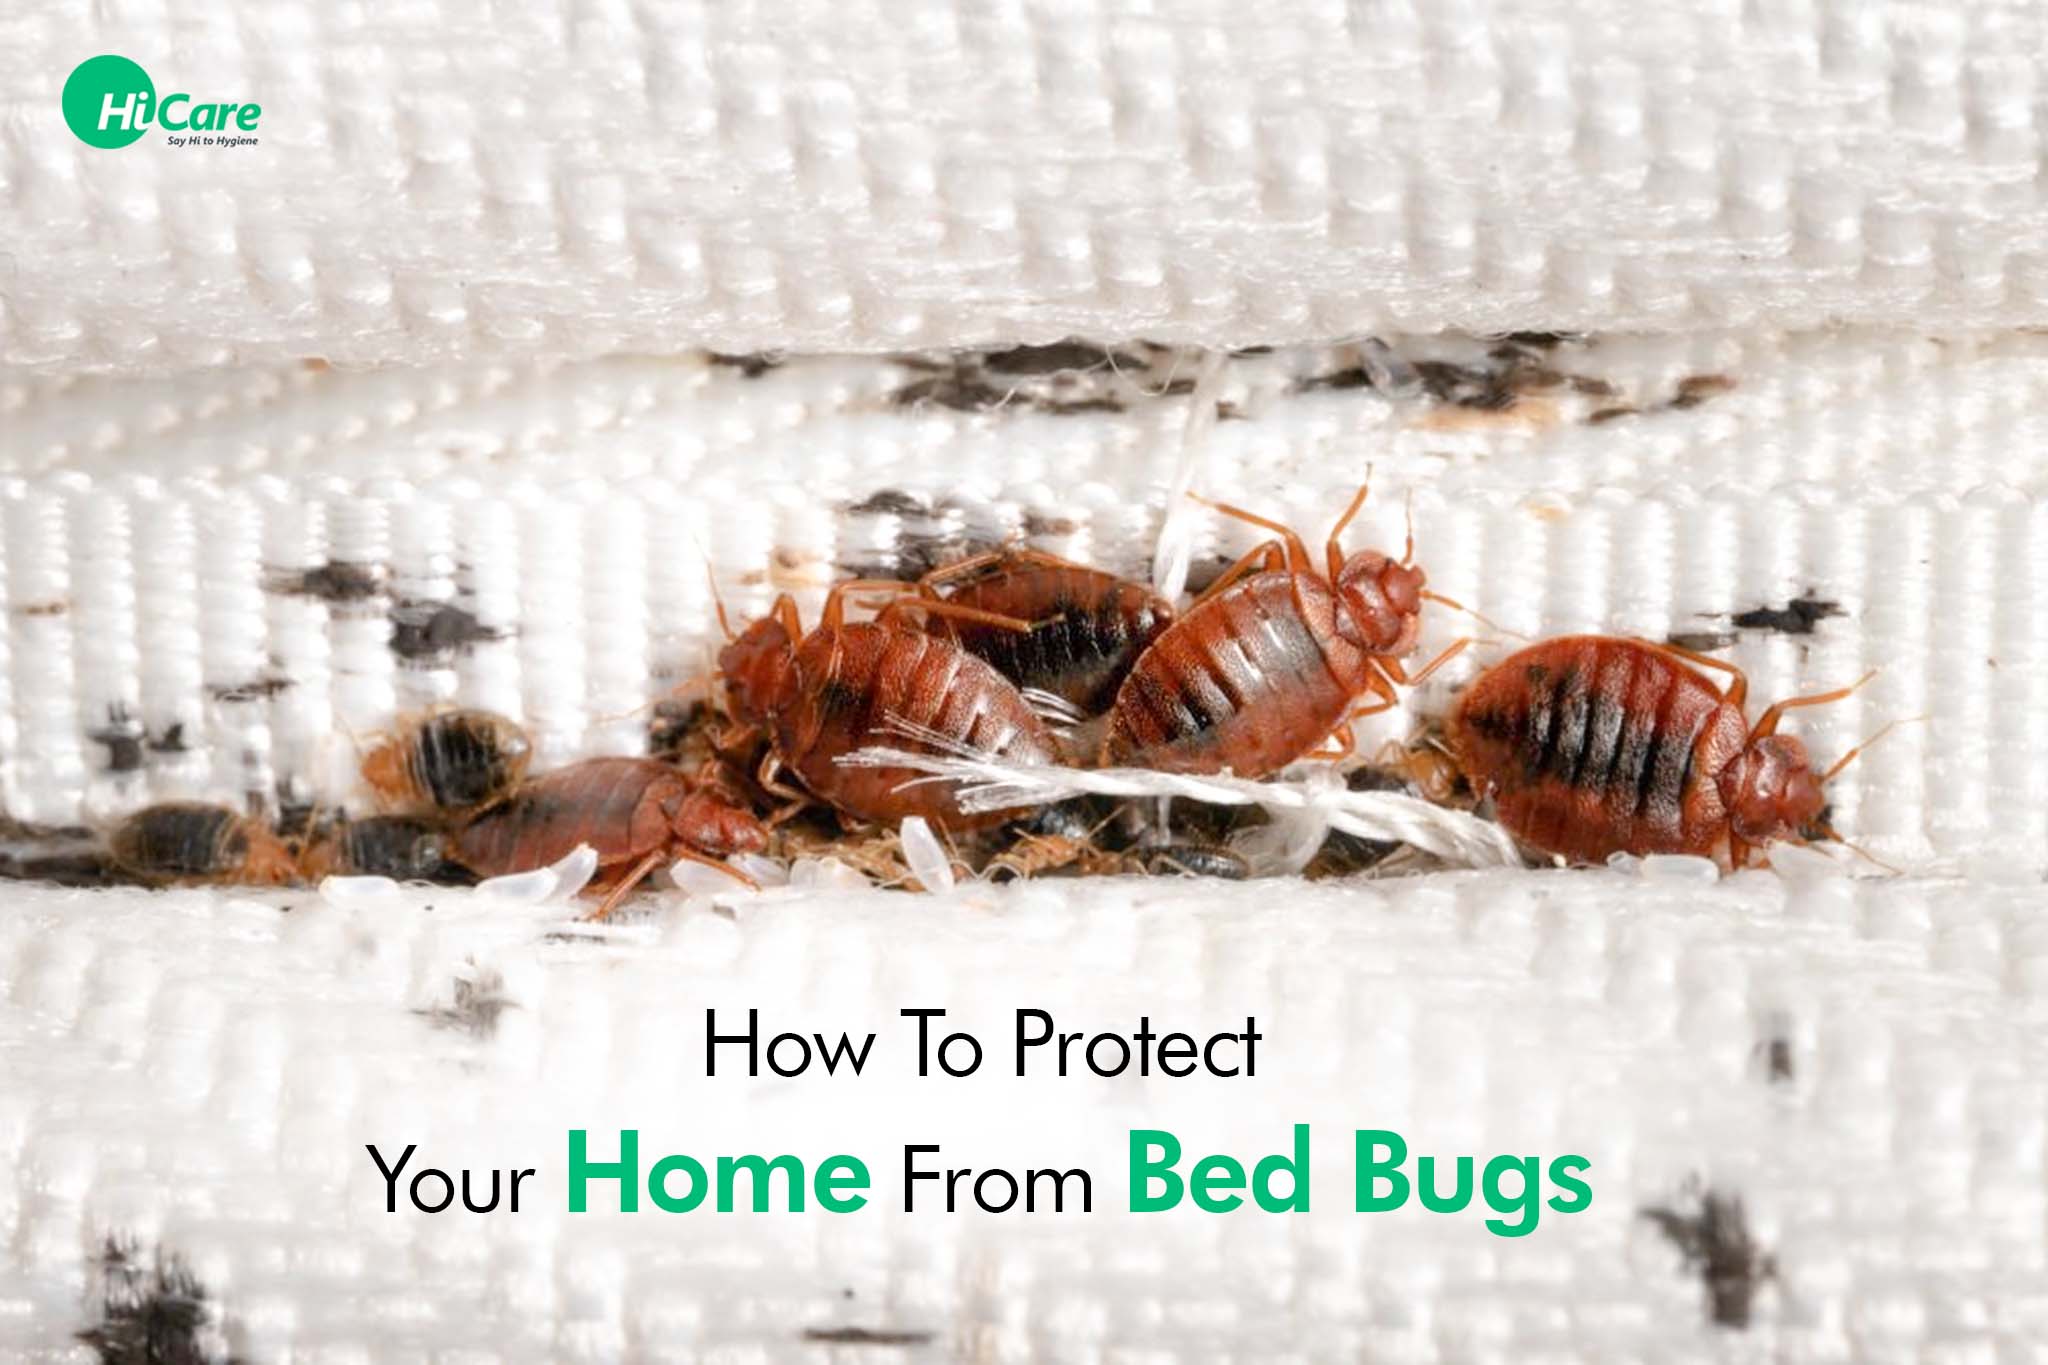 How To Protect Your Home From Bed Bugs | HiCare